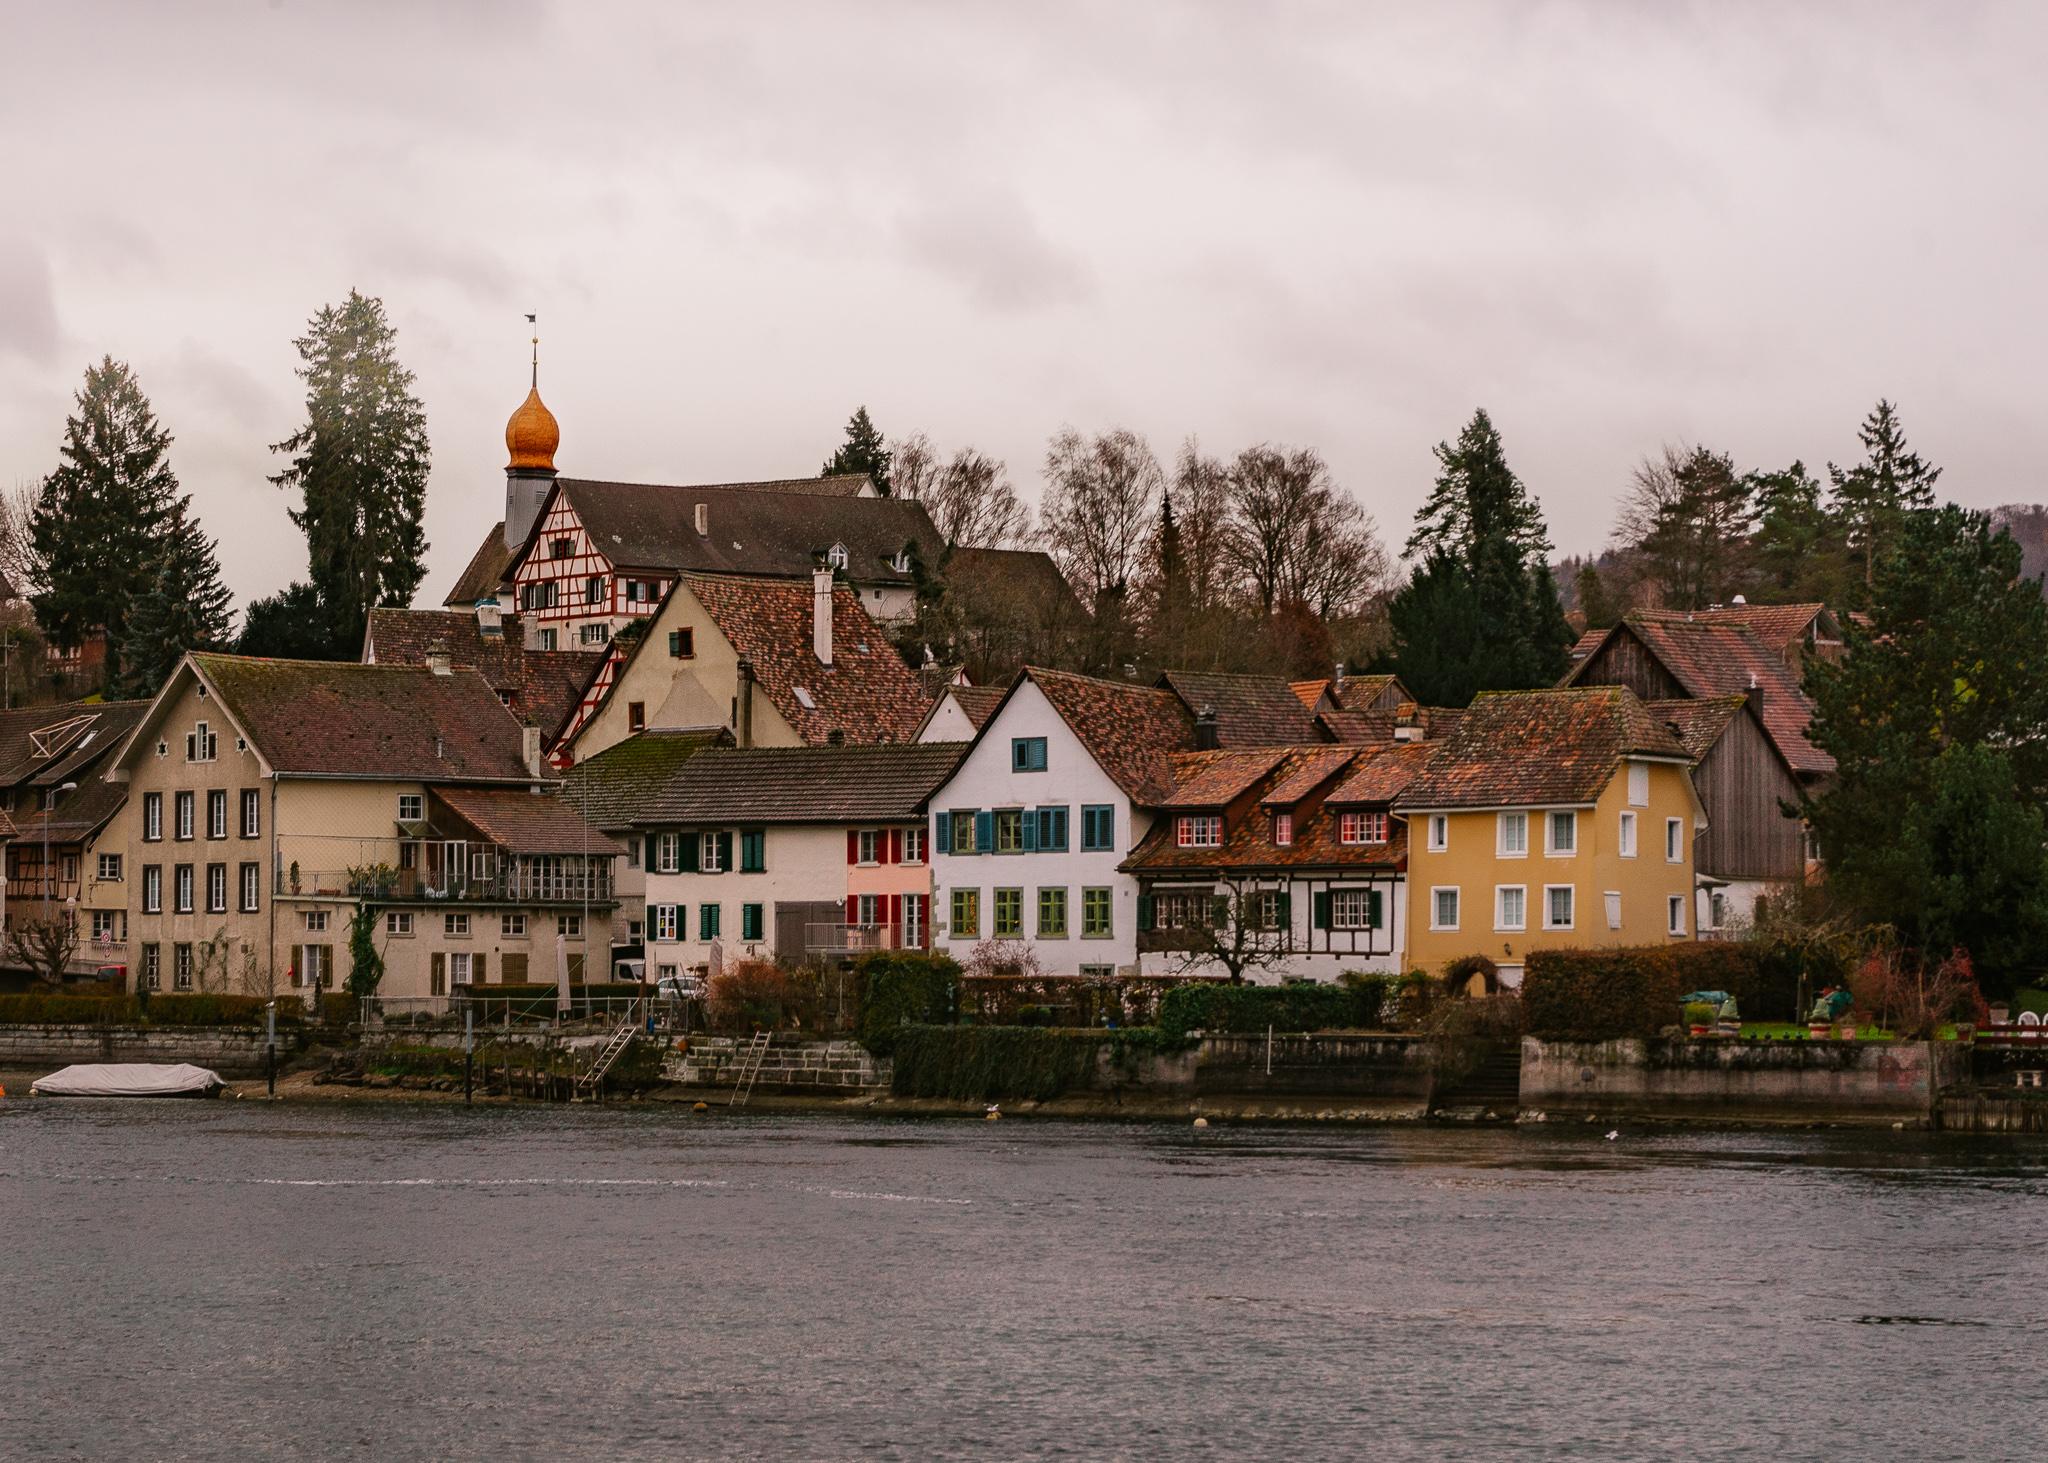 Swiss cottages across the Rhine river in Stein am Rhein in Switzerland on a cloudy, winter day.